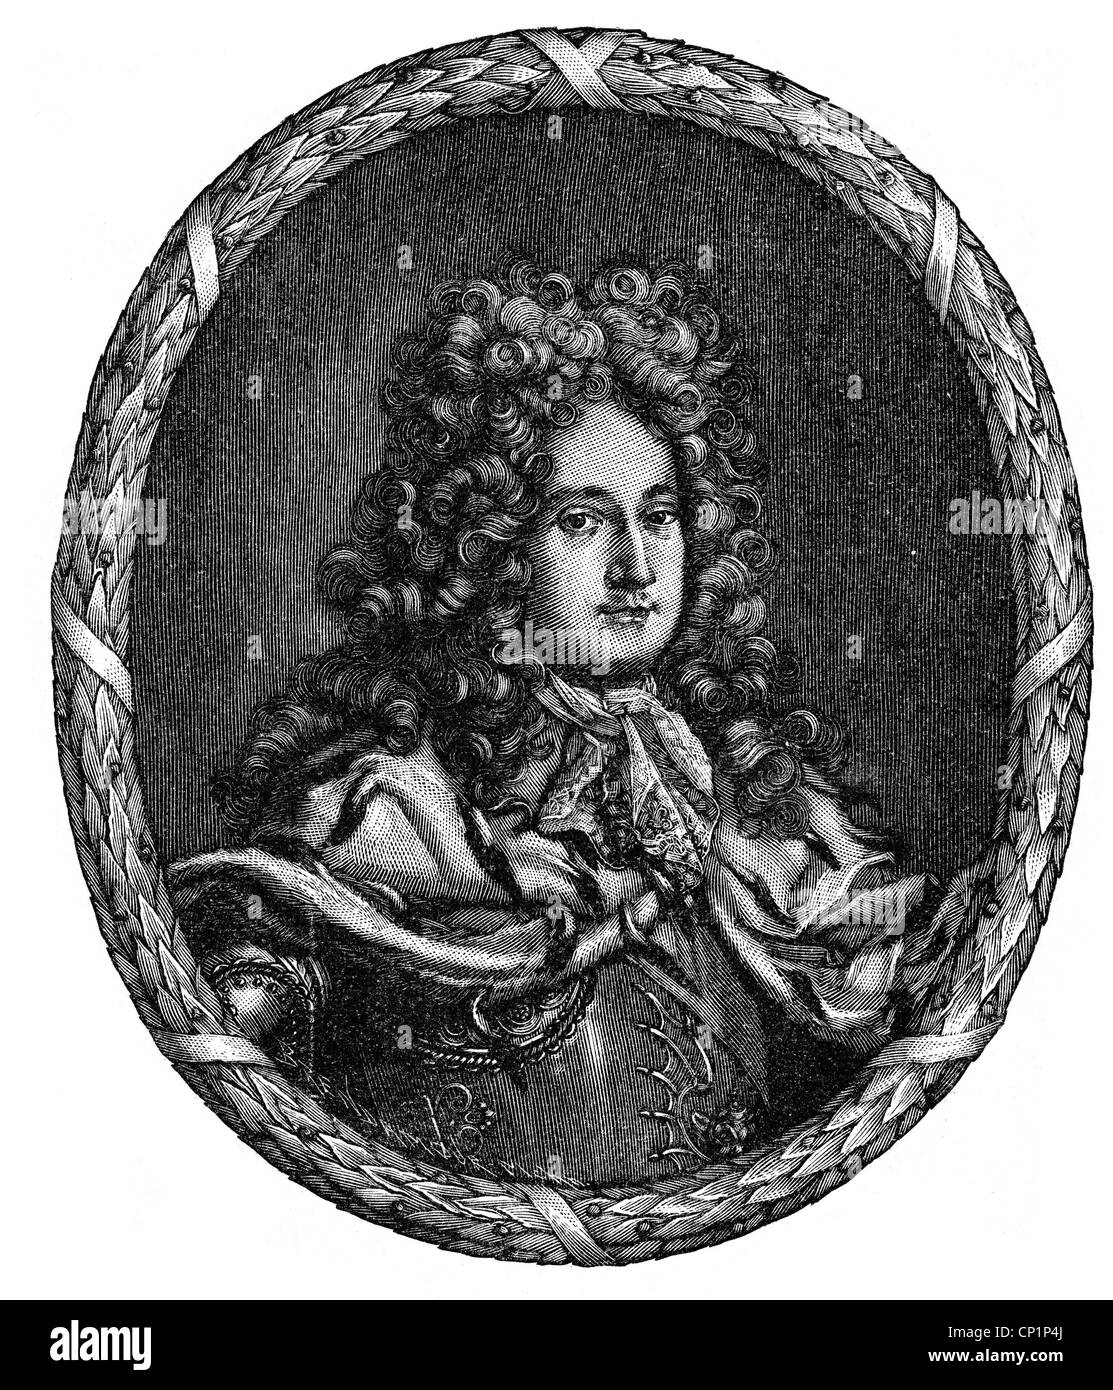 Frederick I, 11.7.1657 - 25.2.1713, King in Prussia  18.1.1701- 25.2.1713, portrait, copper engraving, late 17th century, Artist's Copyright has not to be cleared Stock Photo